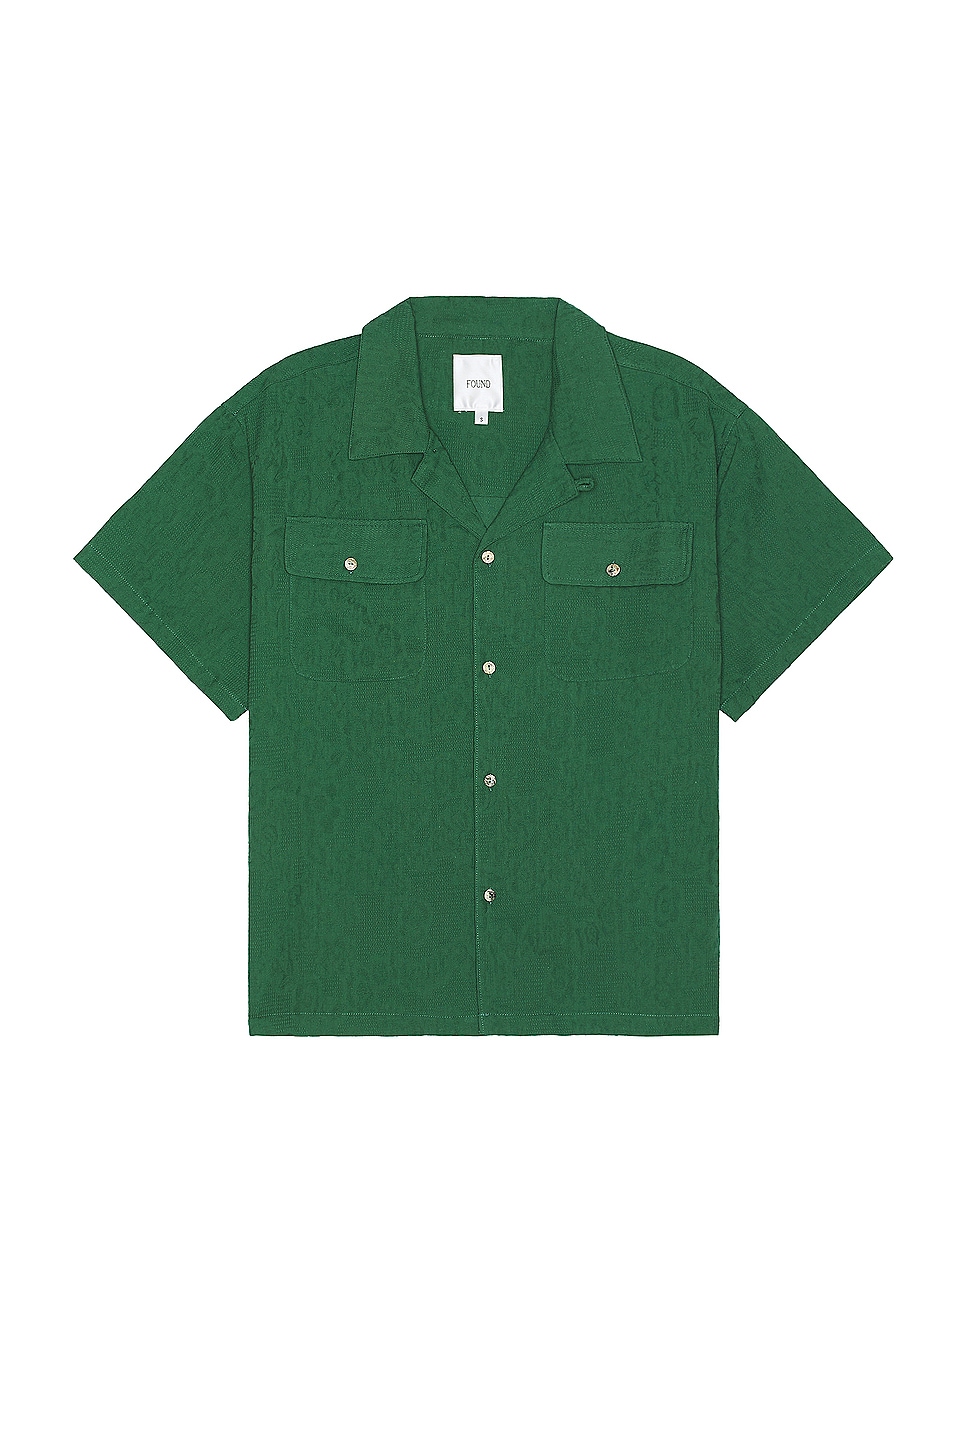 Image 1 of Found Textured Linen Short Sleeve Camp Shirt in Forest